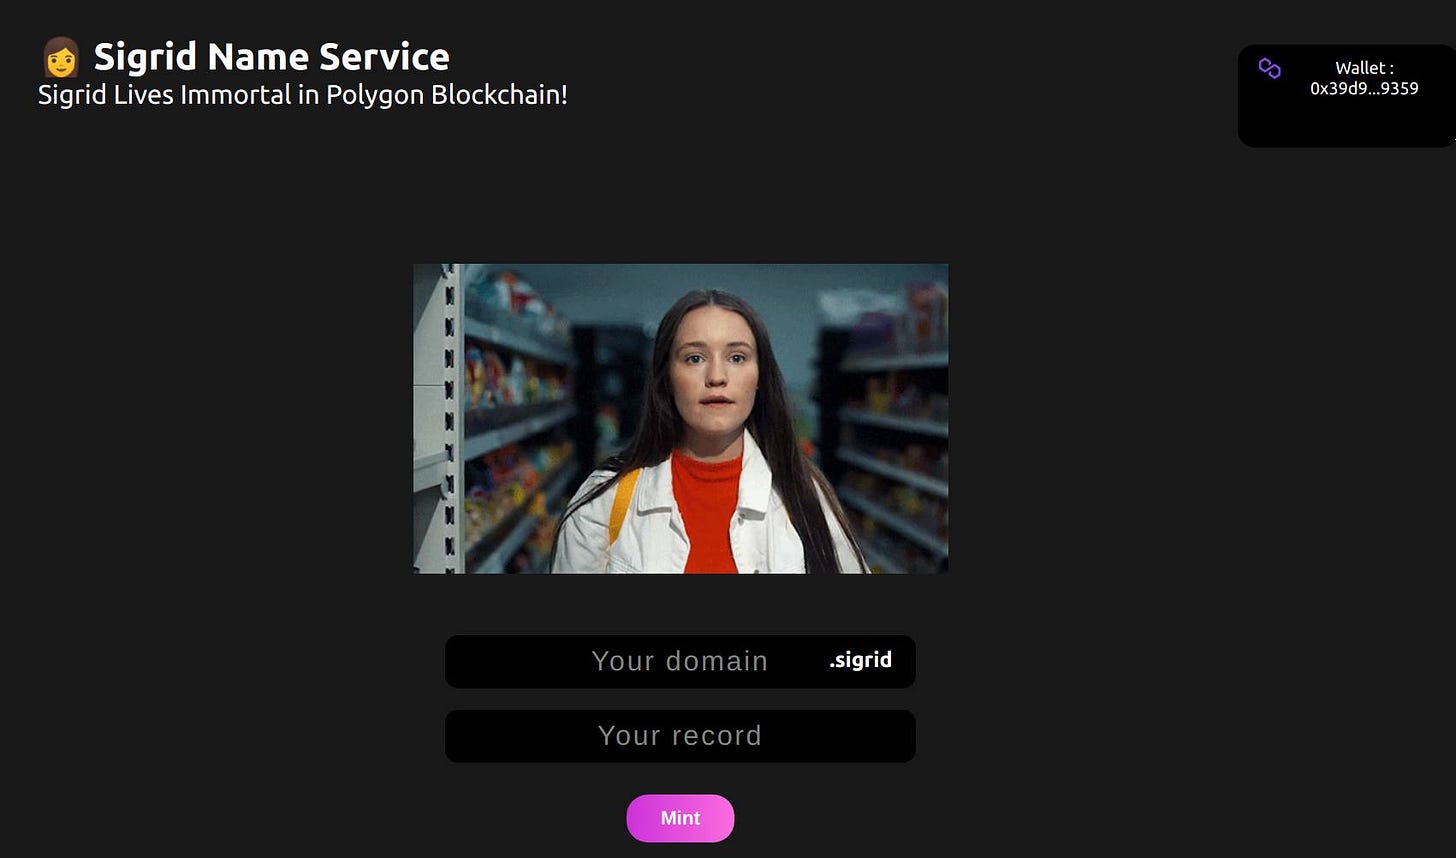 May be an image of 1 person and text that says "Sigrid Name Service Sigrid Lives Immortal in Polygon Blockchain! Walle 0x39d9 0x39d9...9359 9359 Yusgrid Your domain .sigrid Yourrecord Your ecord Mint"